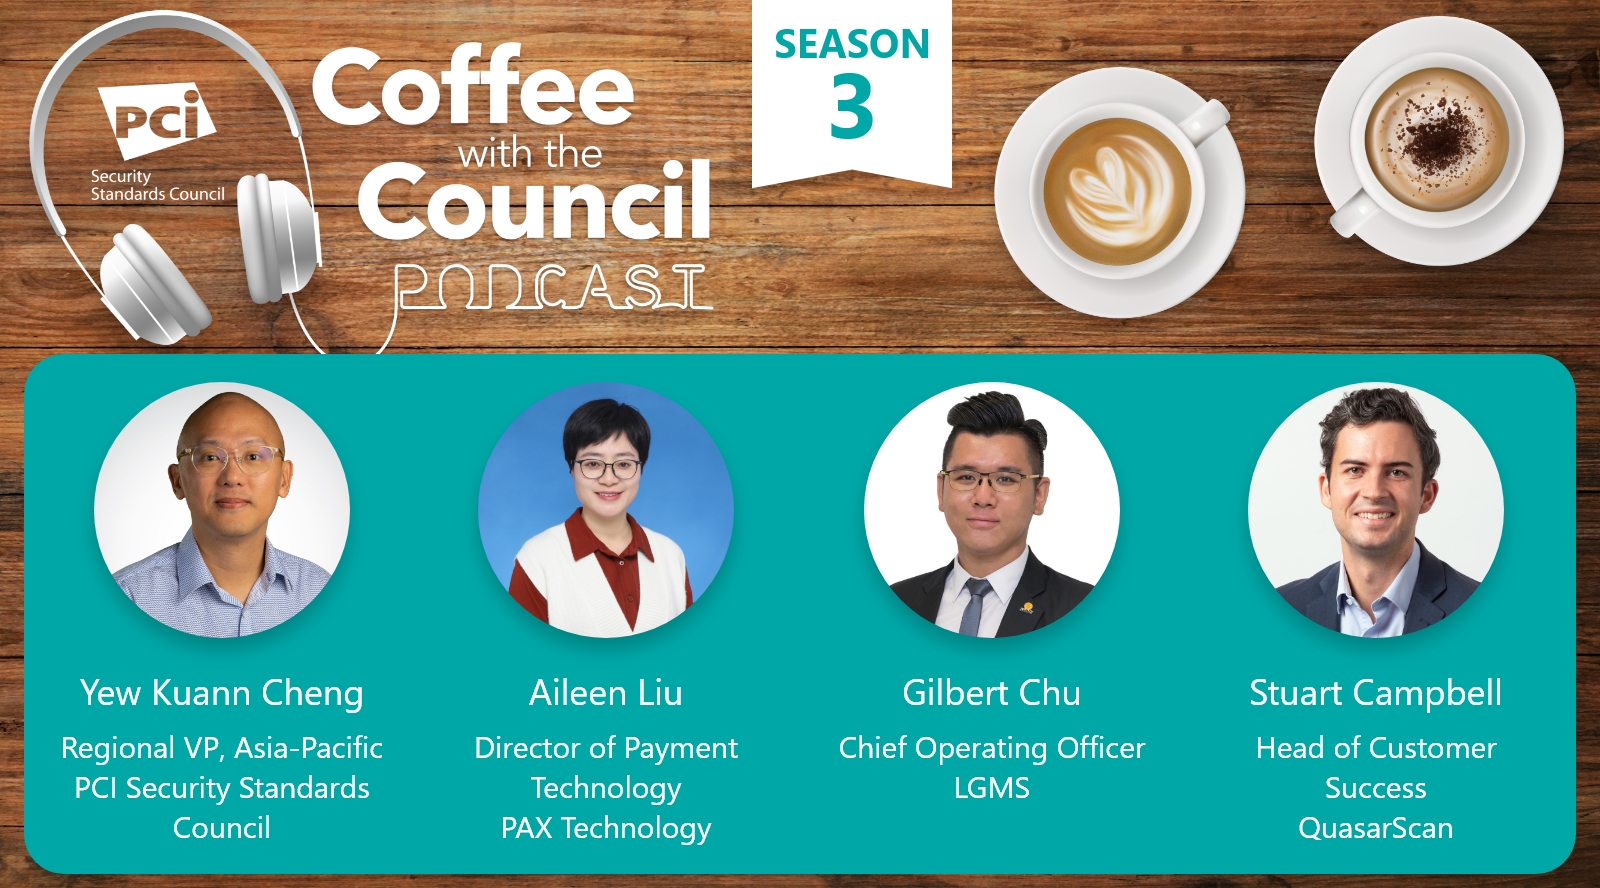 Coffee with the Council Podcast: A Panel Discussion from Asia-Pacific Hosted by Yew Kuann Cheng